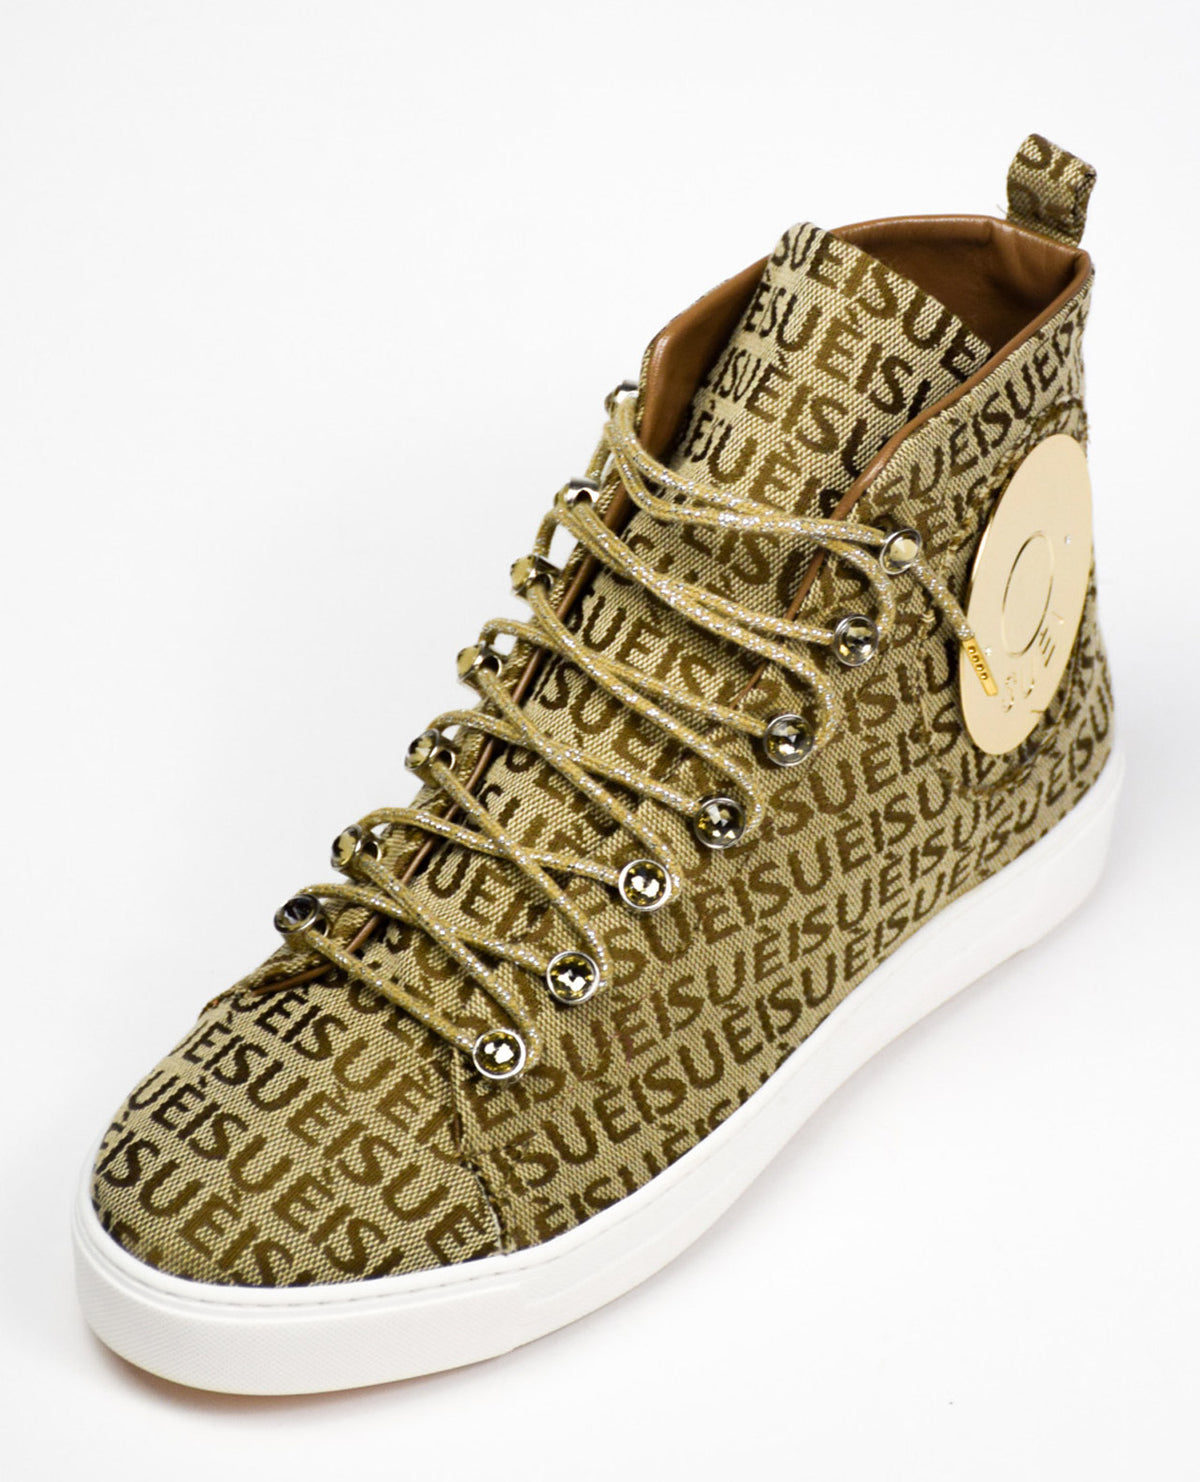 SNEAKERS OF BRANDED JACQUARD WITH ACCESSOR-PLATE